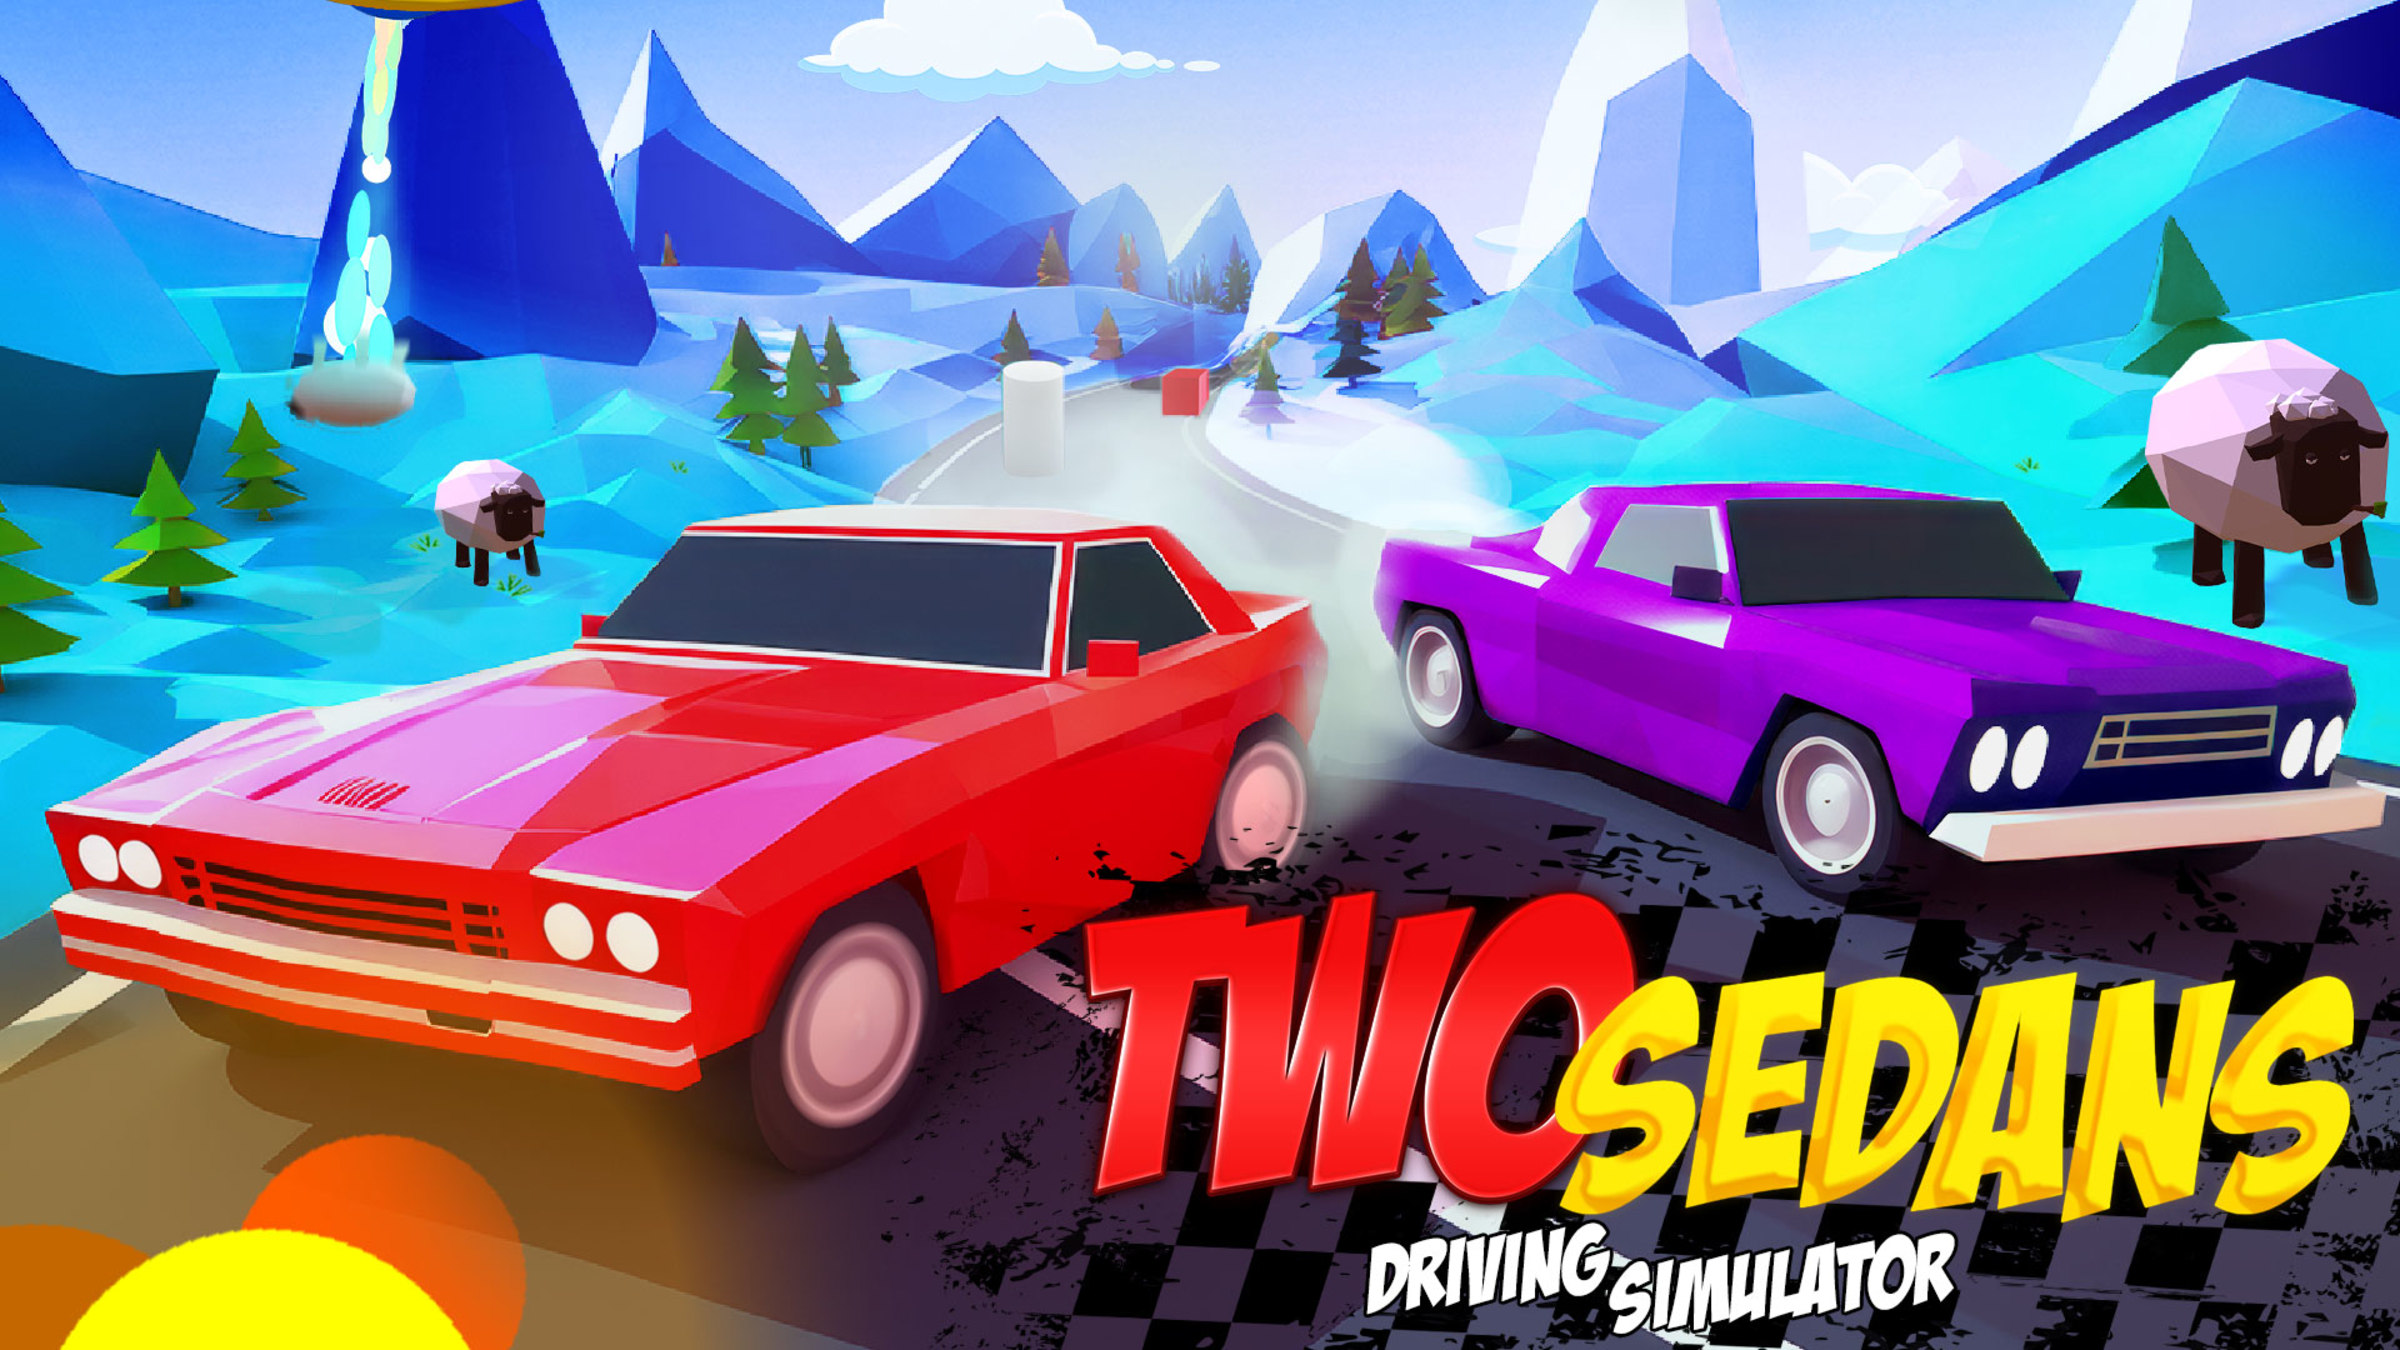 Two Sedans Driving Simulator for Nintendo Switch - Nintendo Official Site